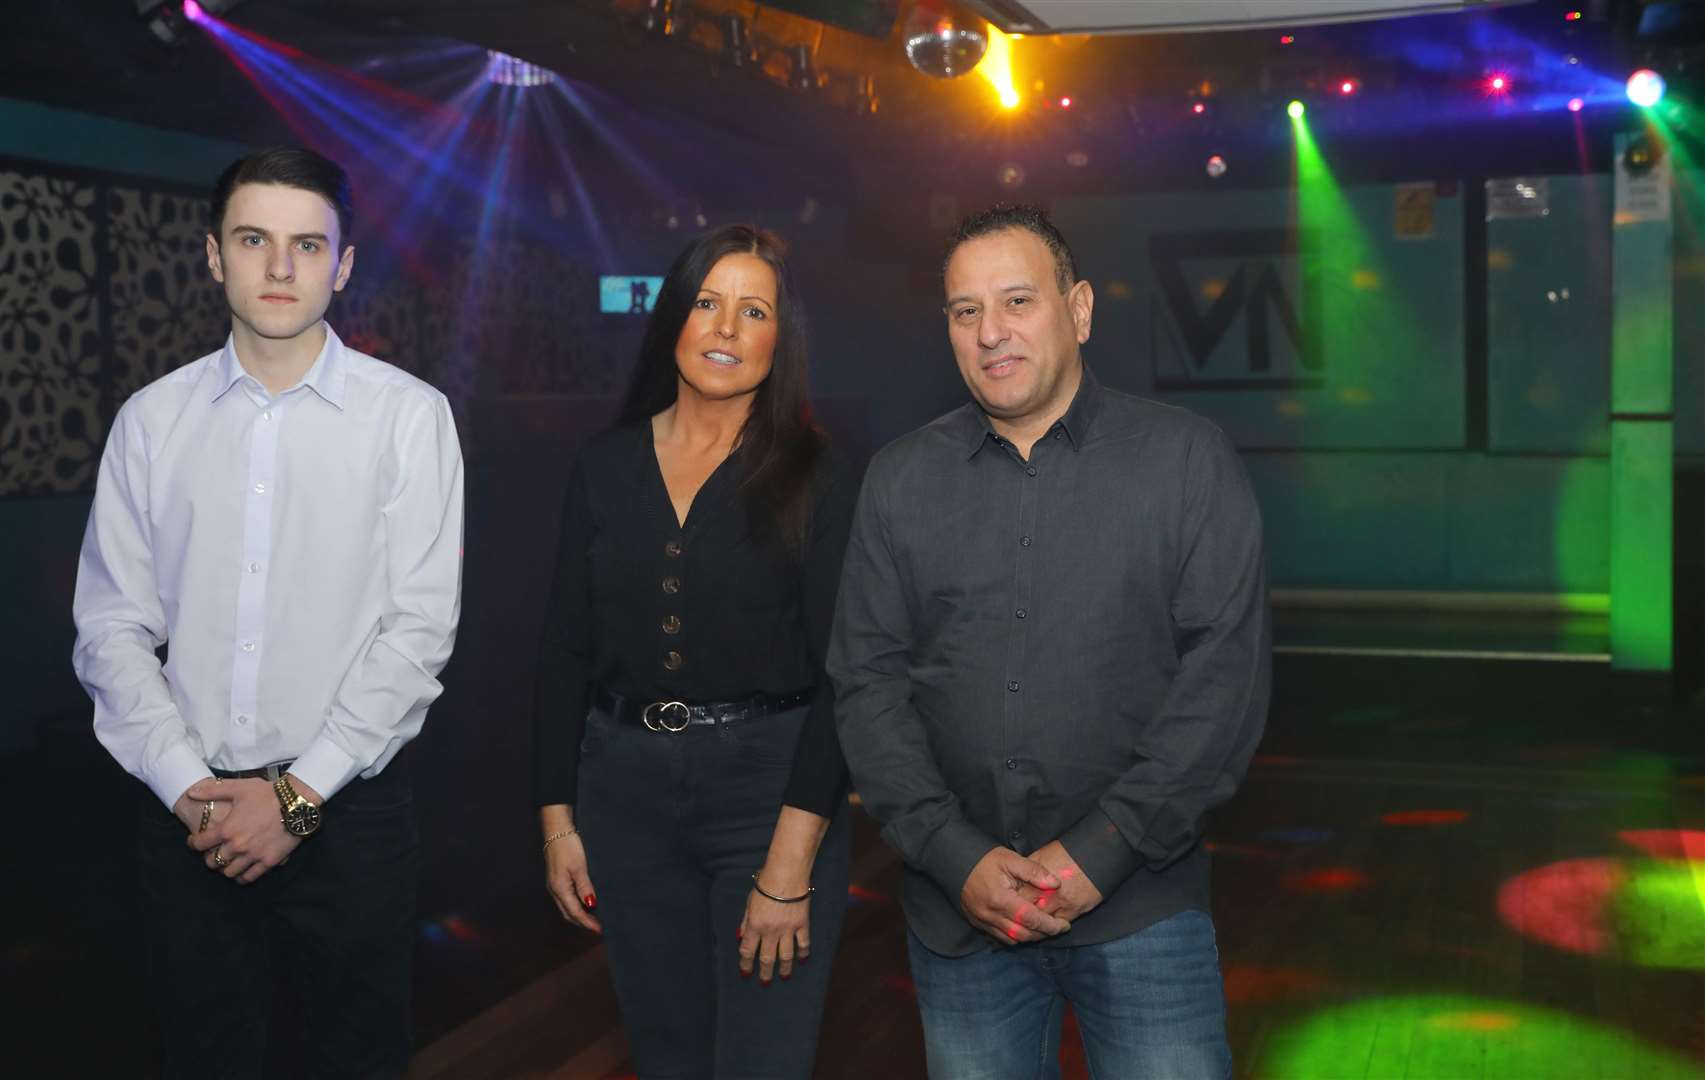 Owner Karl Ahmad, right, stood inside Vivid earlier this year with son Nathan Ahmad and partner Debbie Whitehead